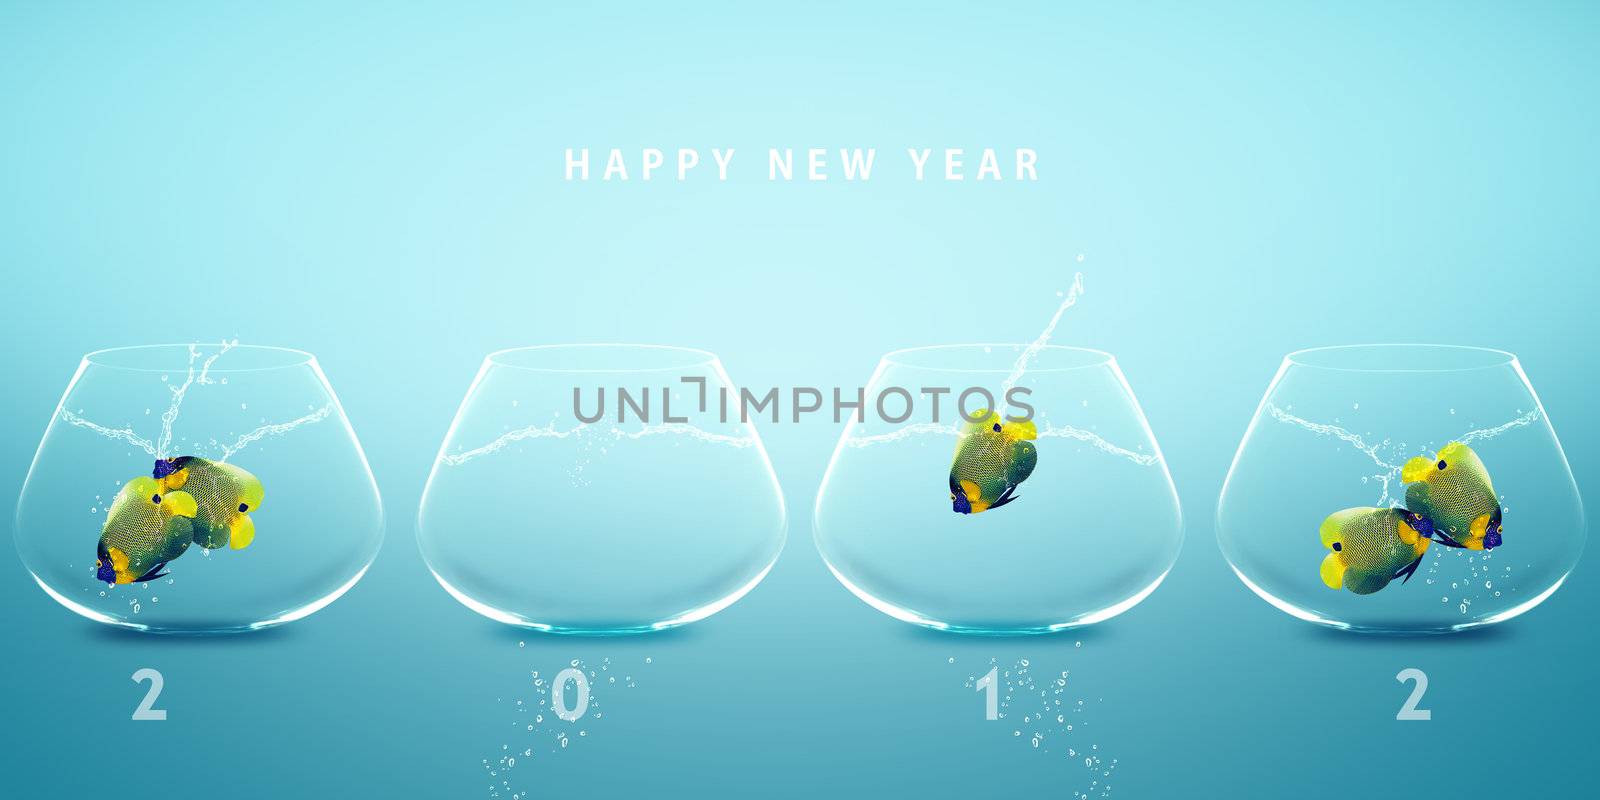 Happy new year 2012, conceptual image angelfish jumping to new fish bowl and creating 2012 year number.